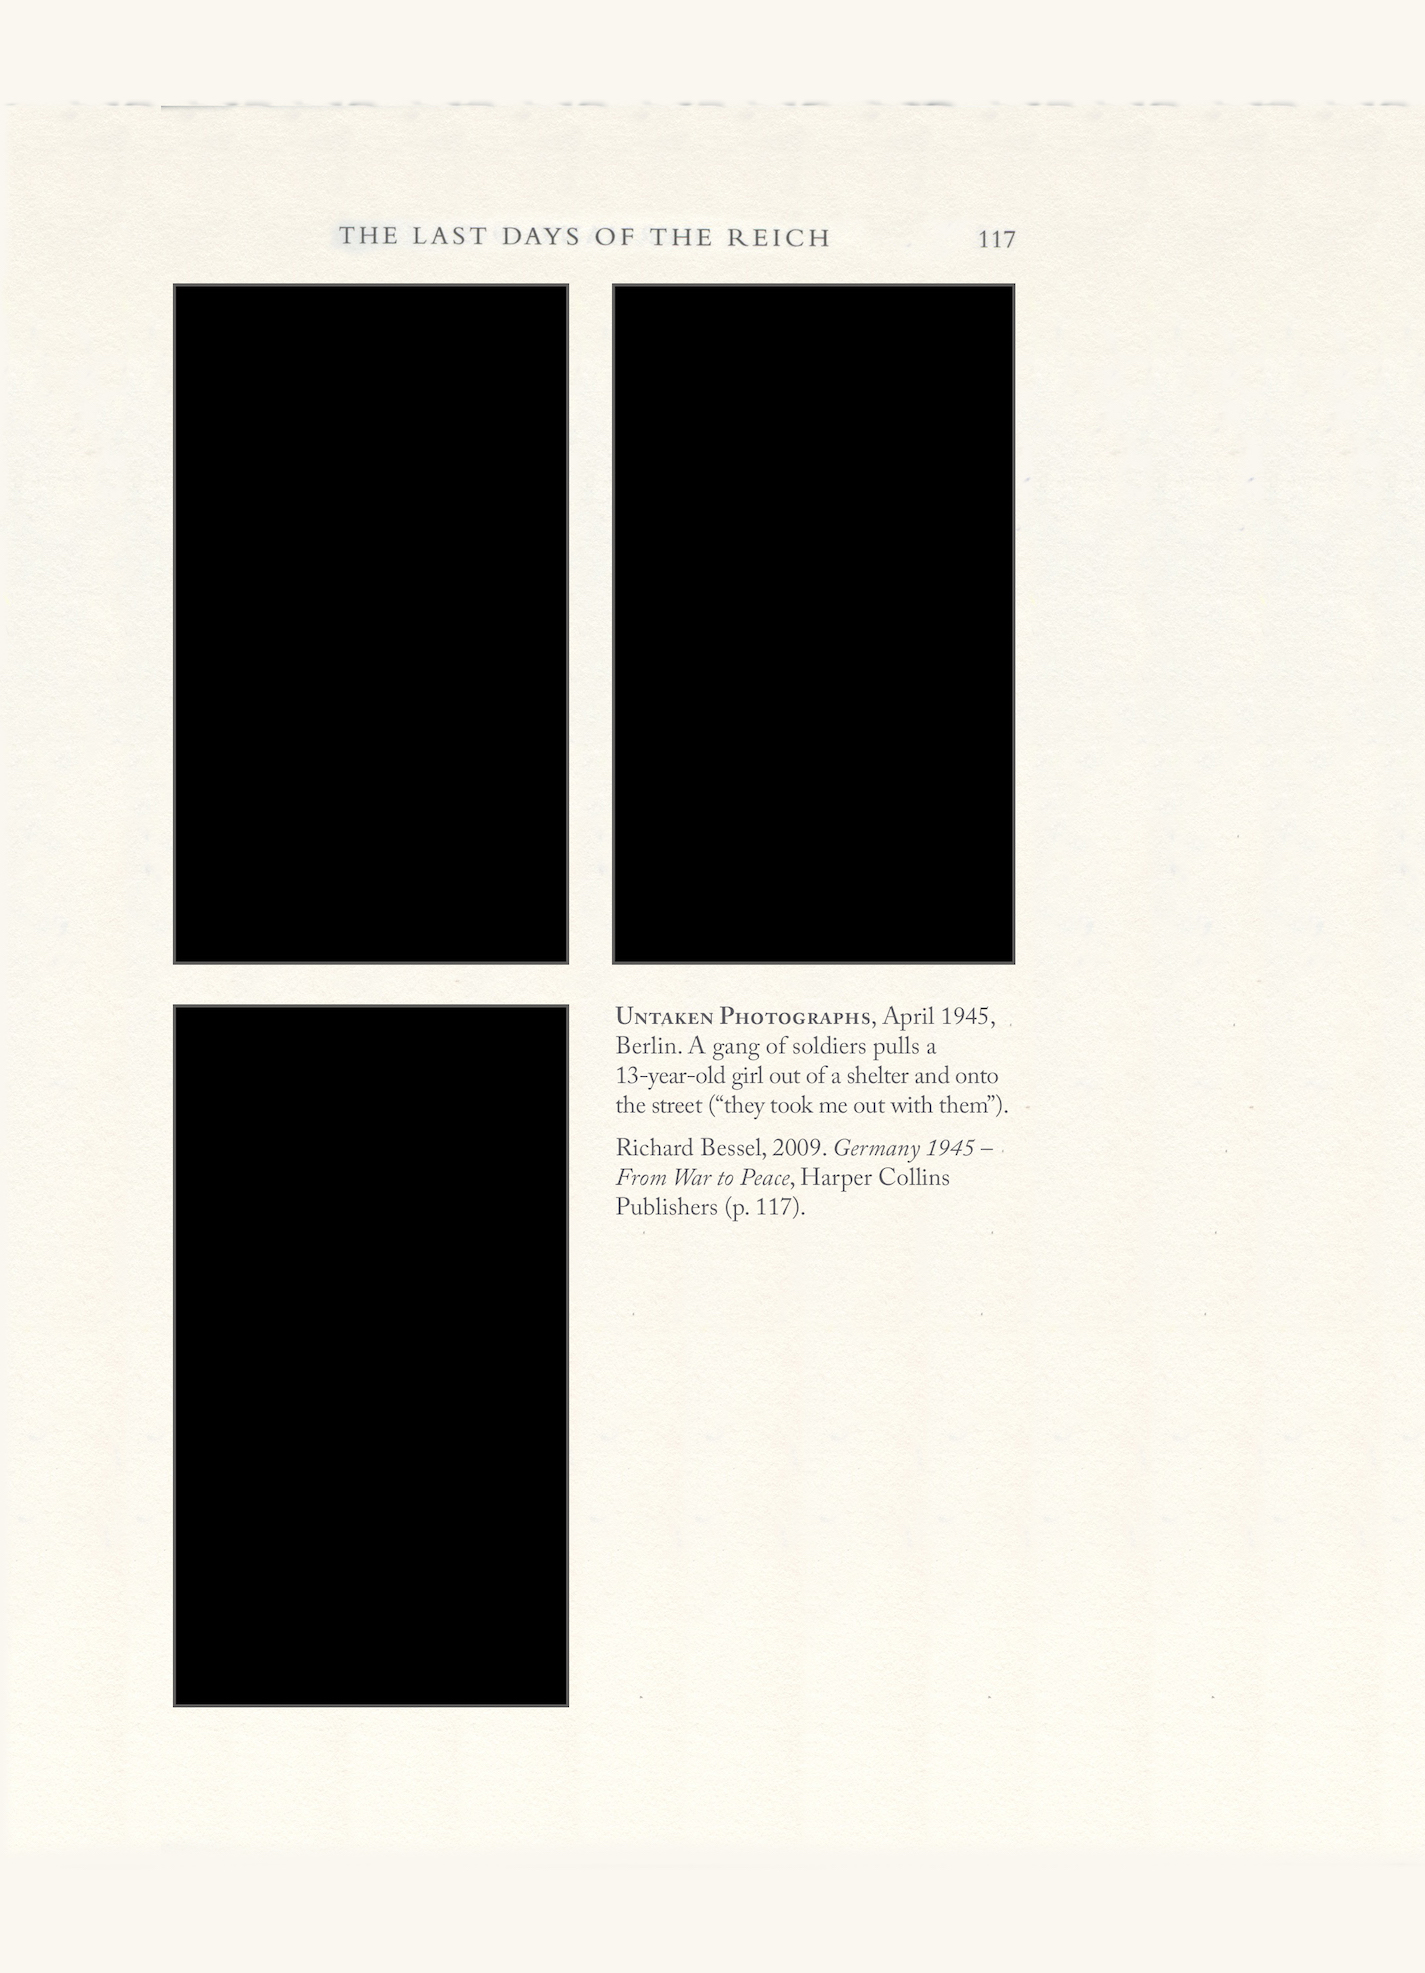 A page of a book with three blacked out untaken photographs with 